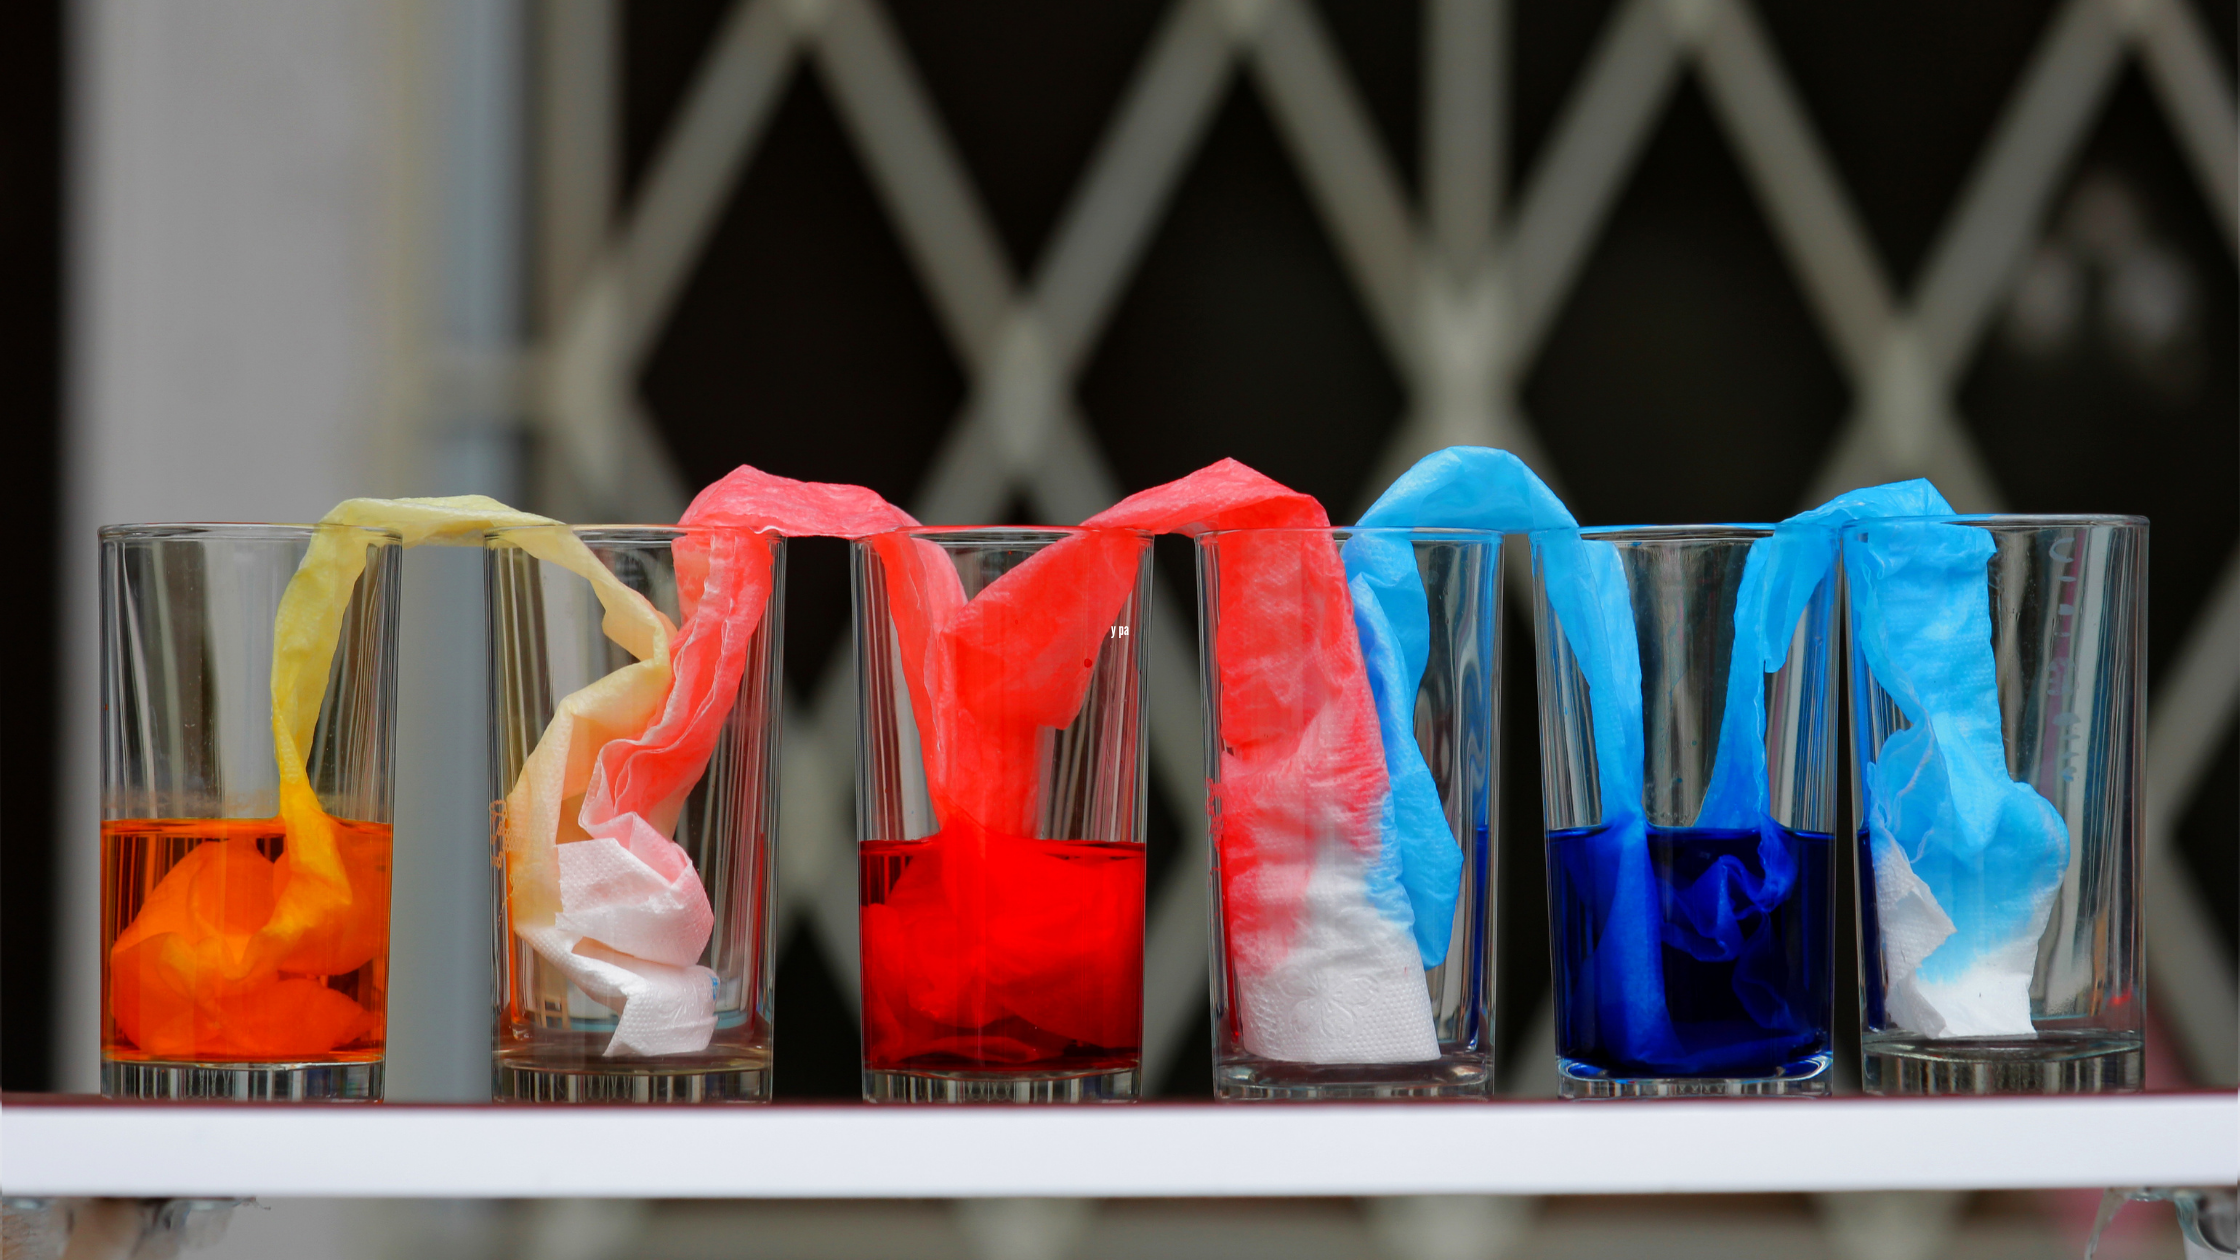 5 Fun & Cool Science Activities with Dye to Do With the Kids 5